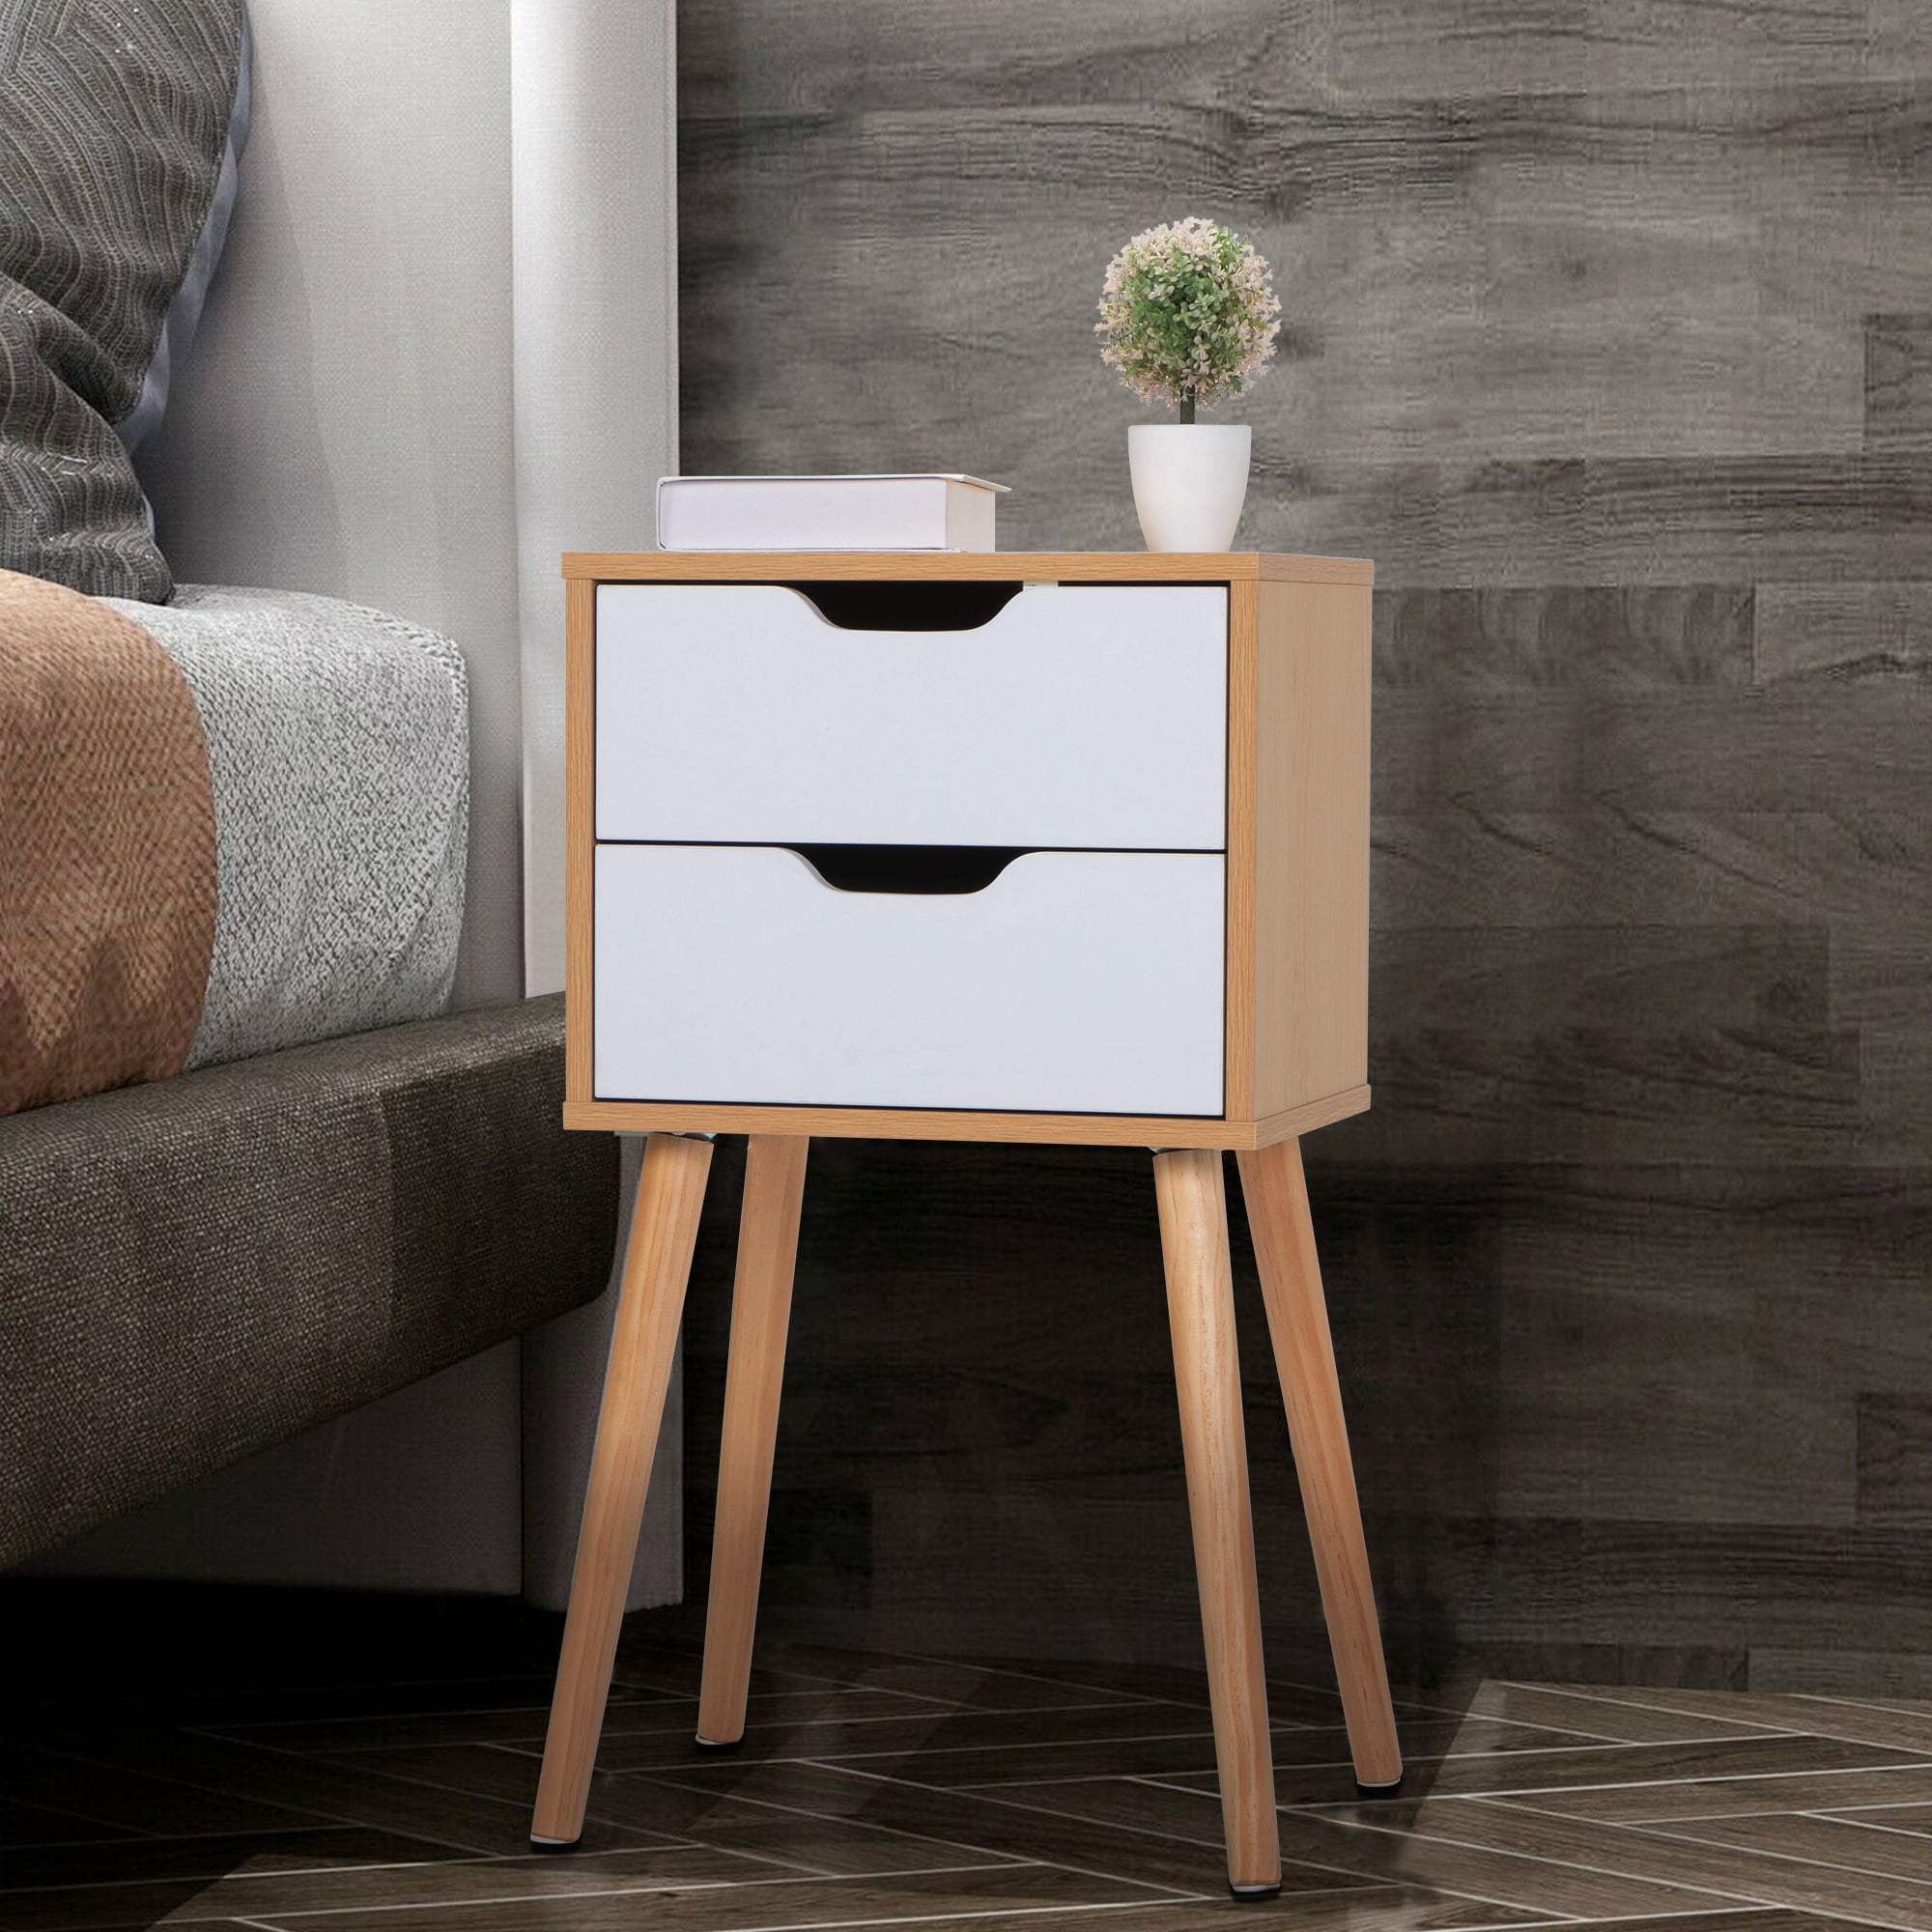 Mainstays Classic Nightstand With Drawer Espresso Xf2bp4 for sale online 